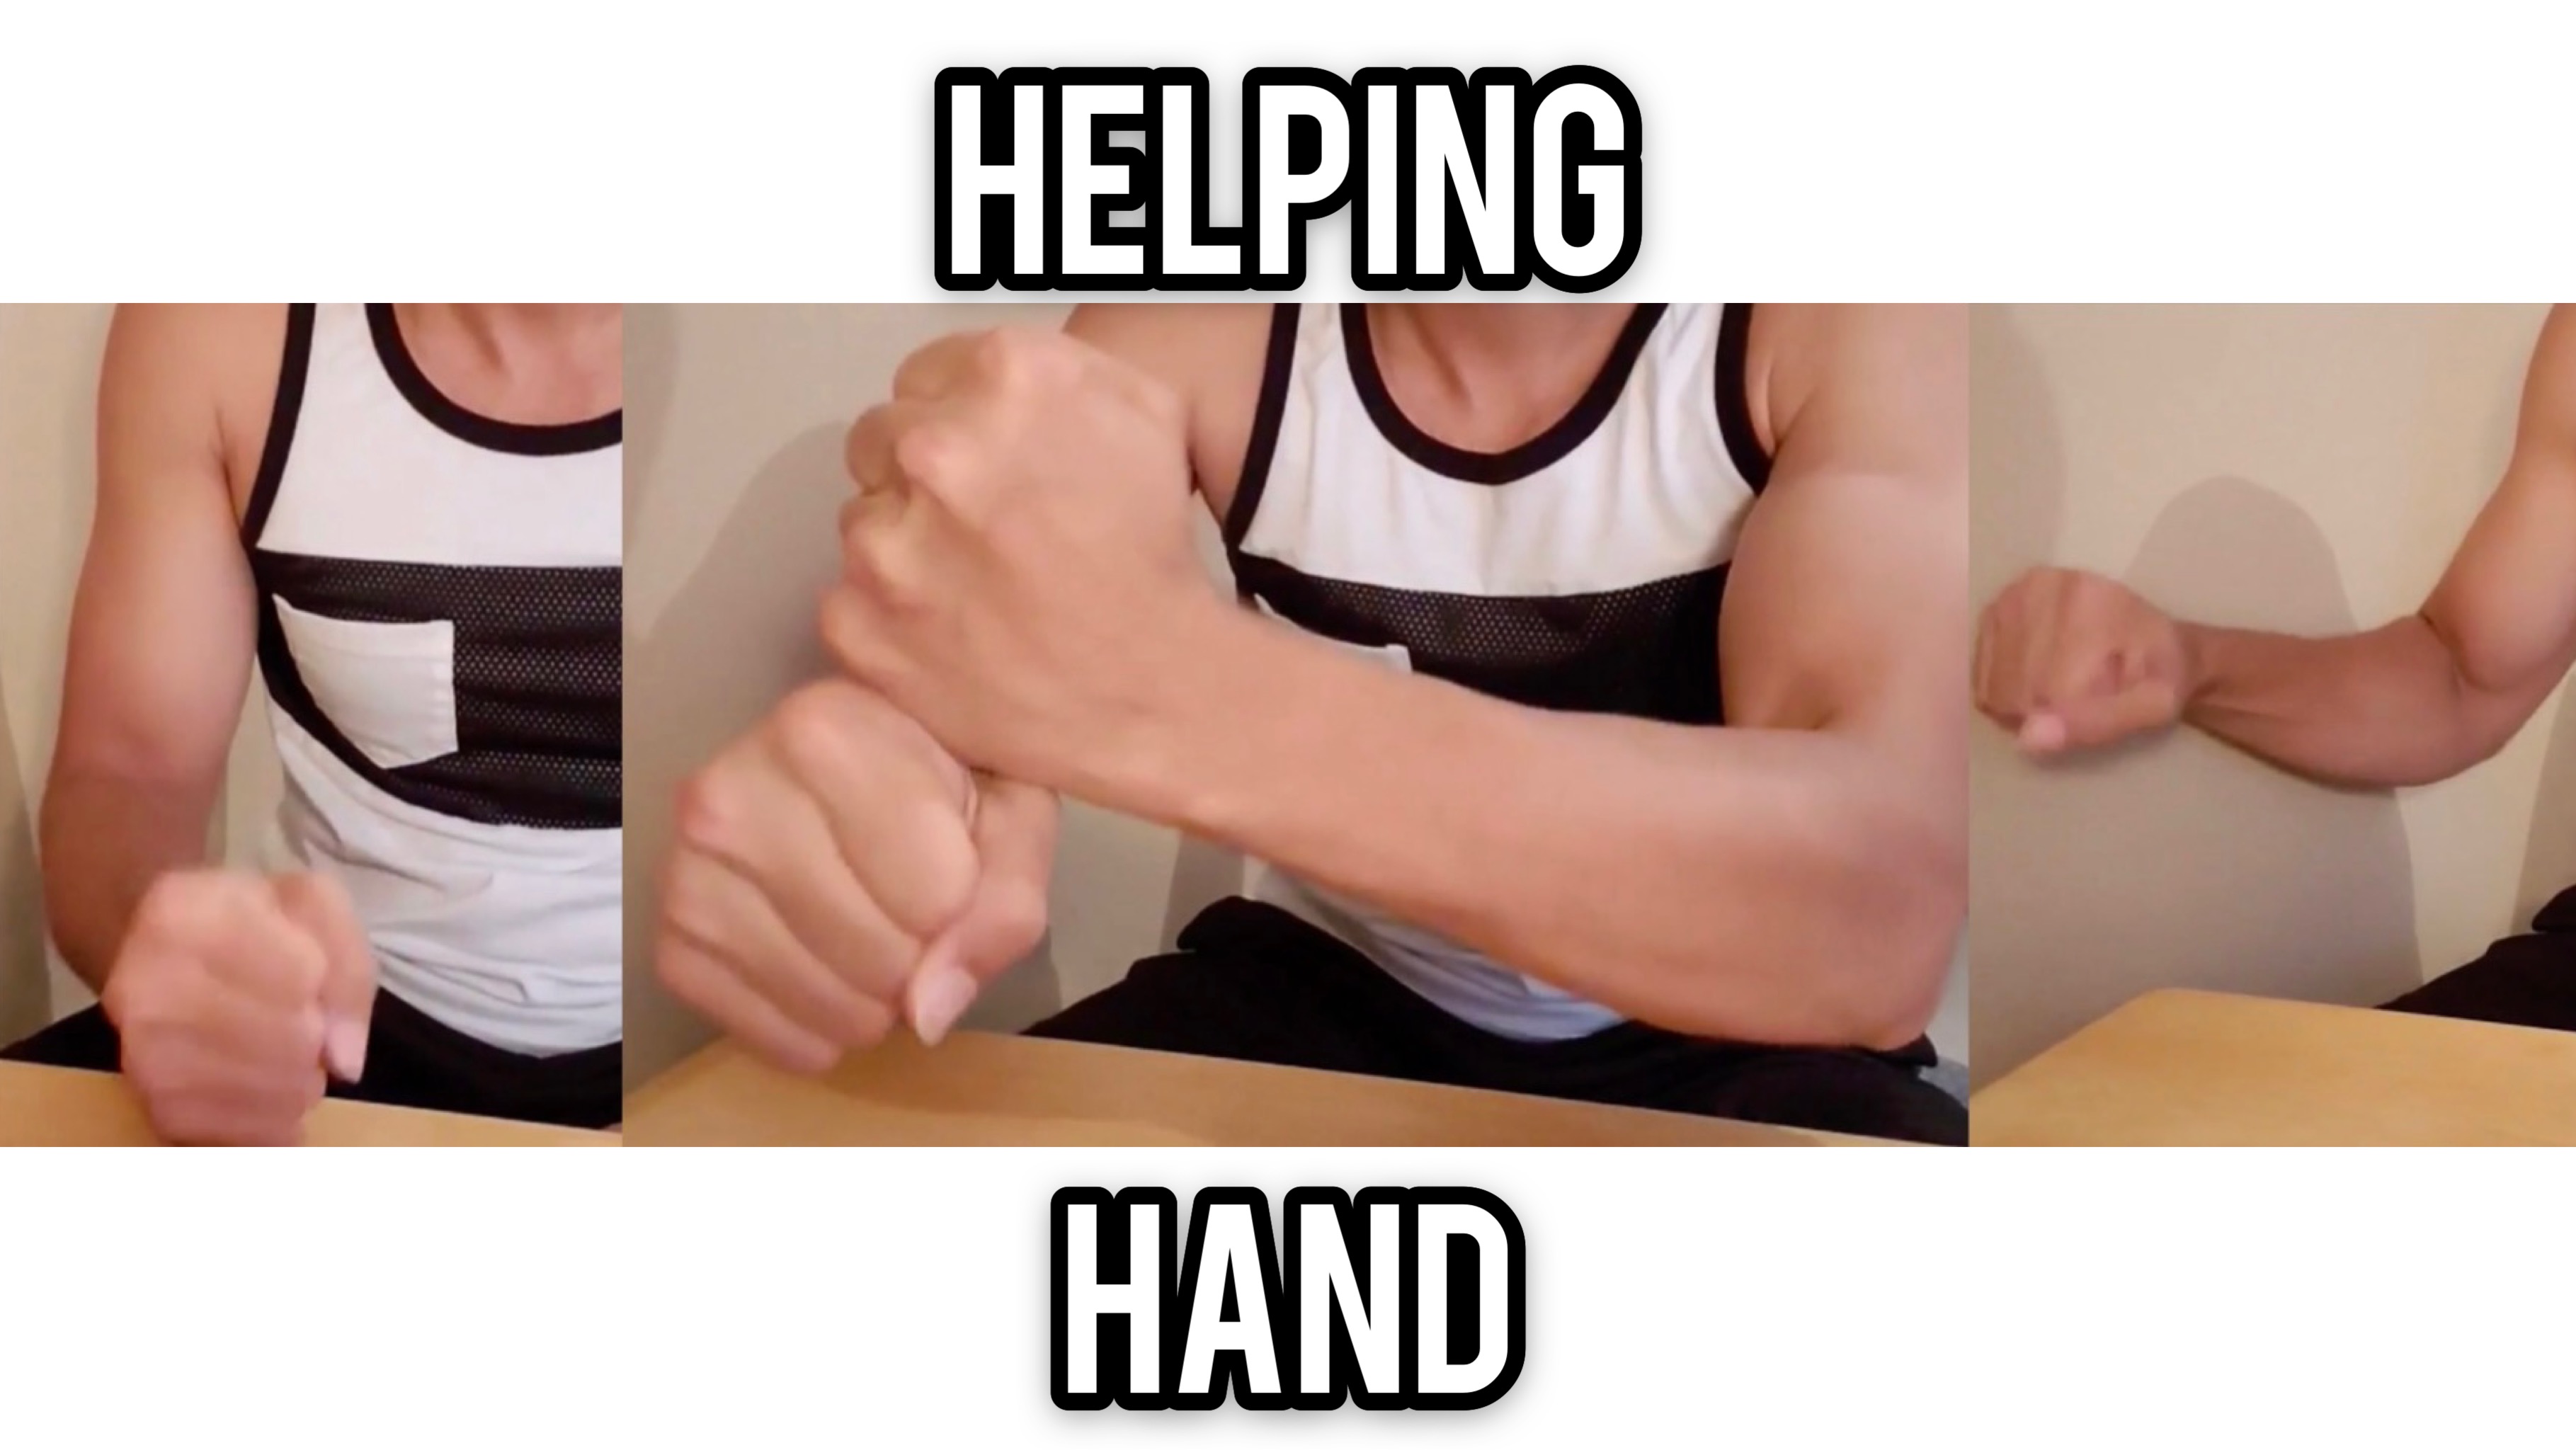 The Different Ways To Give A Handjob